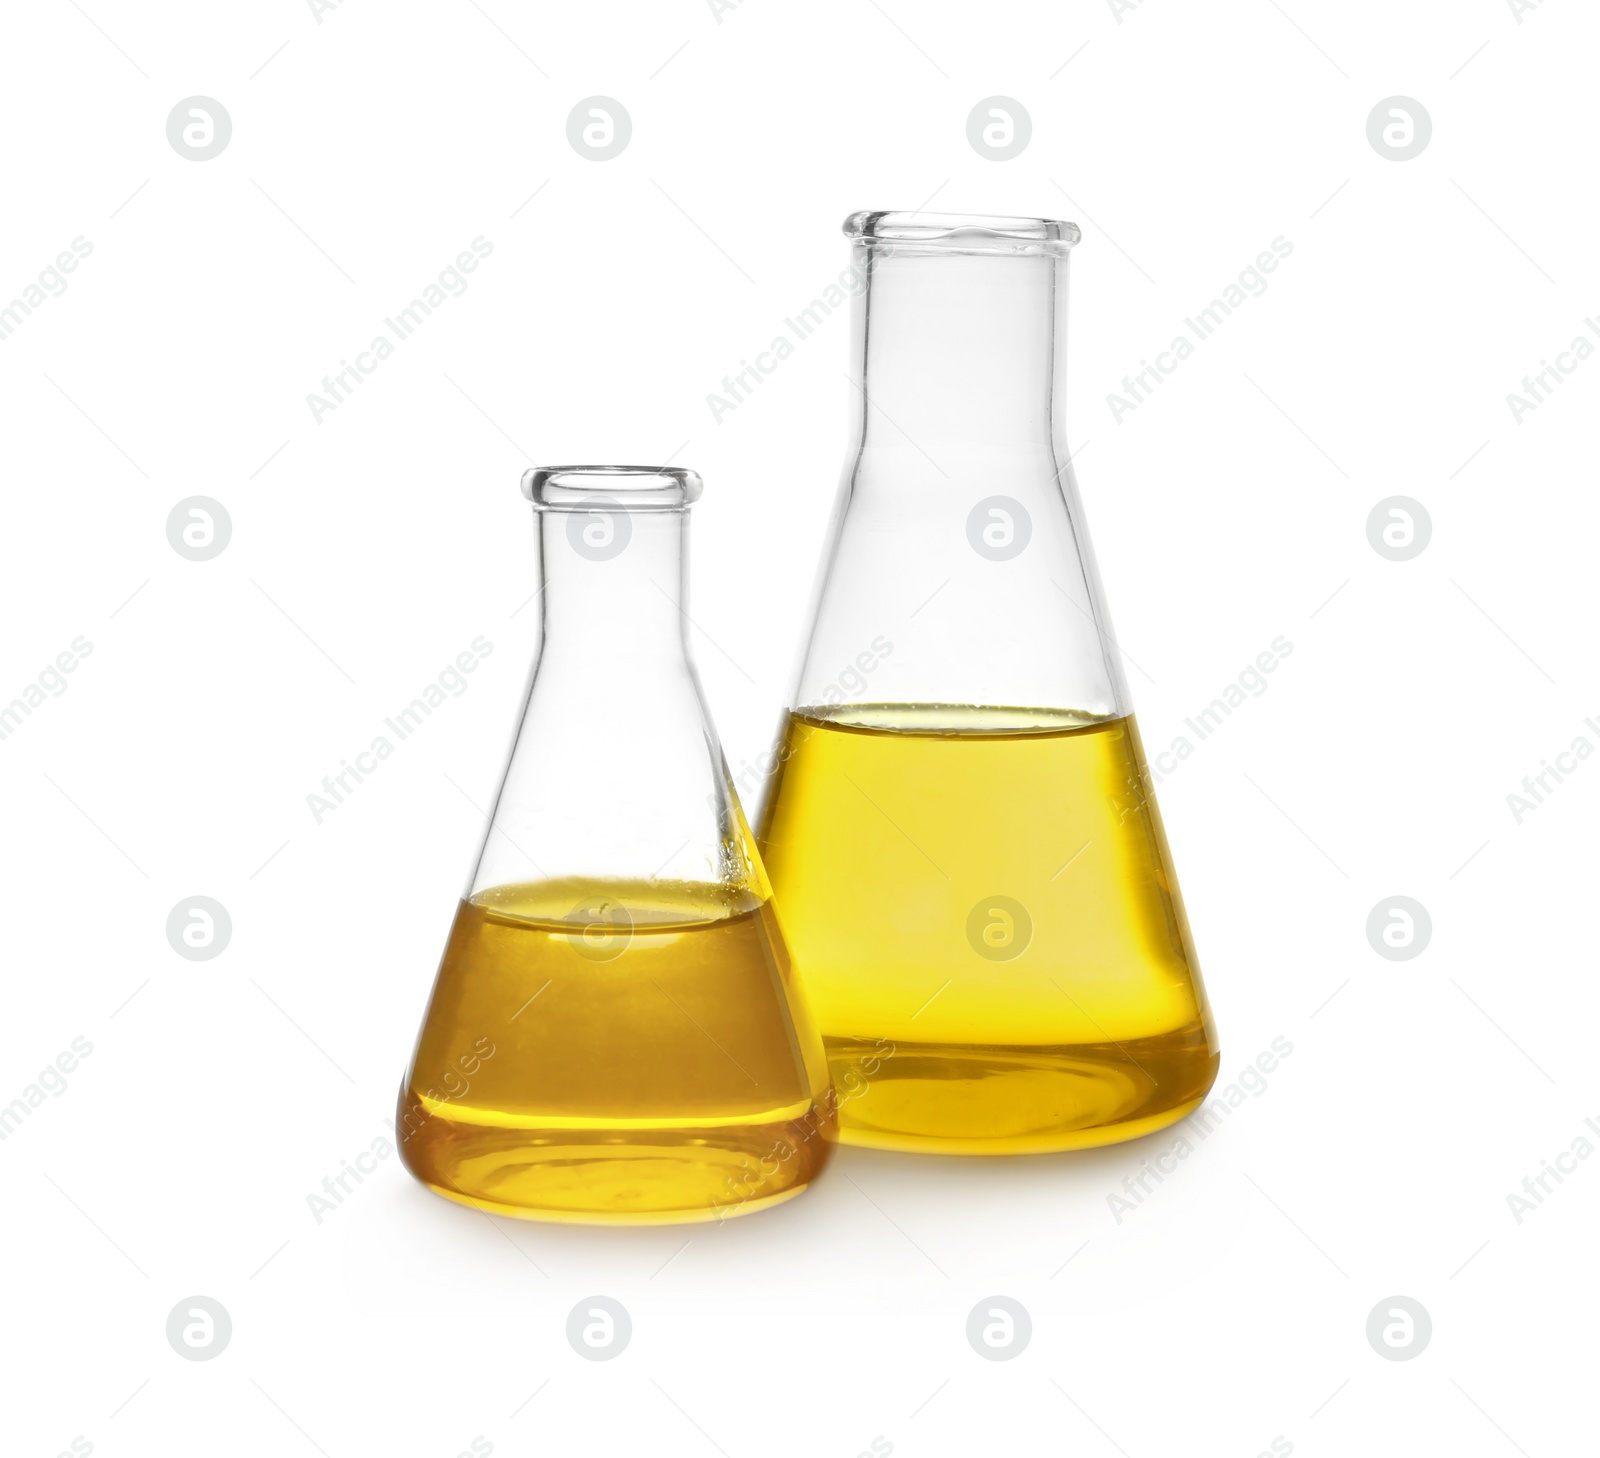 Photo of Conical flasks with yellow liquid on white background